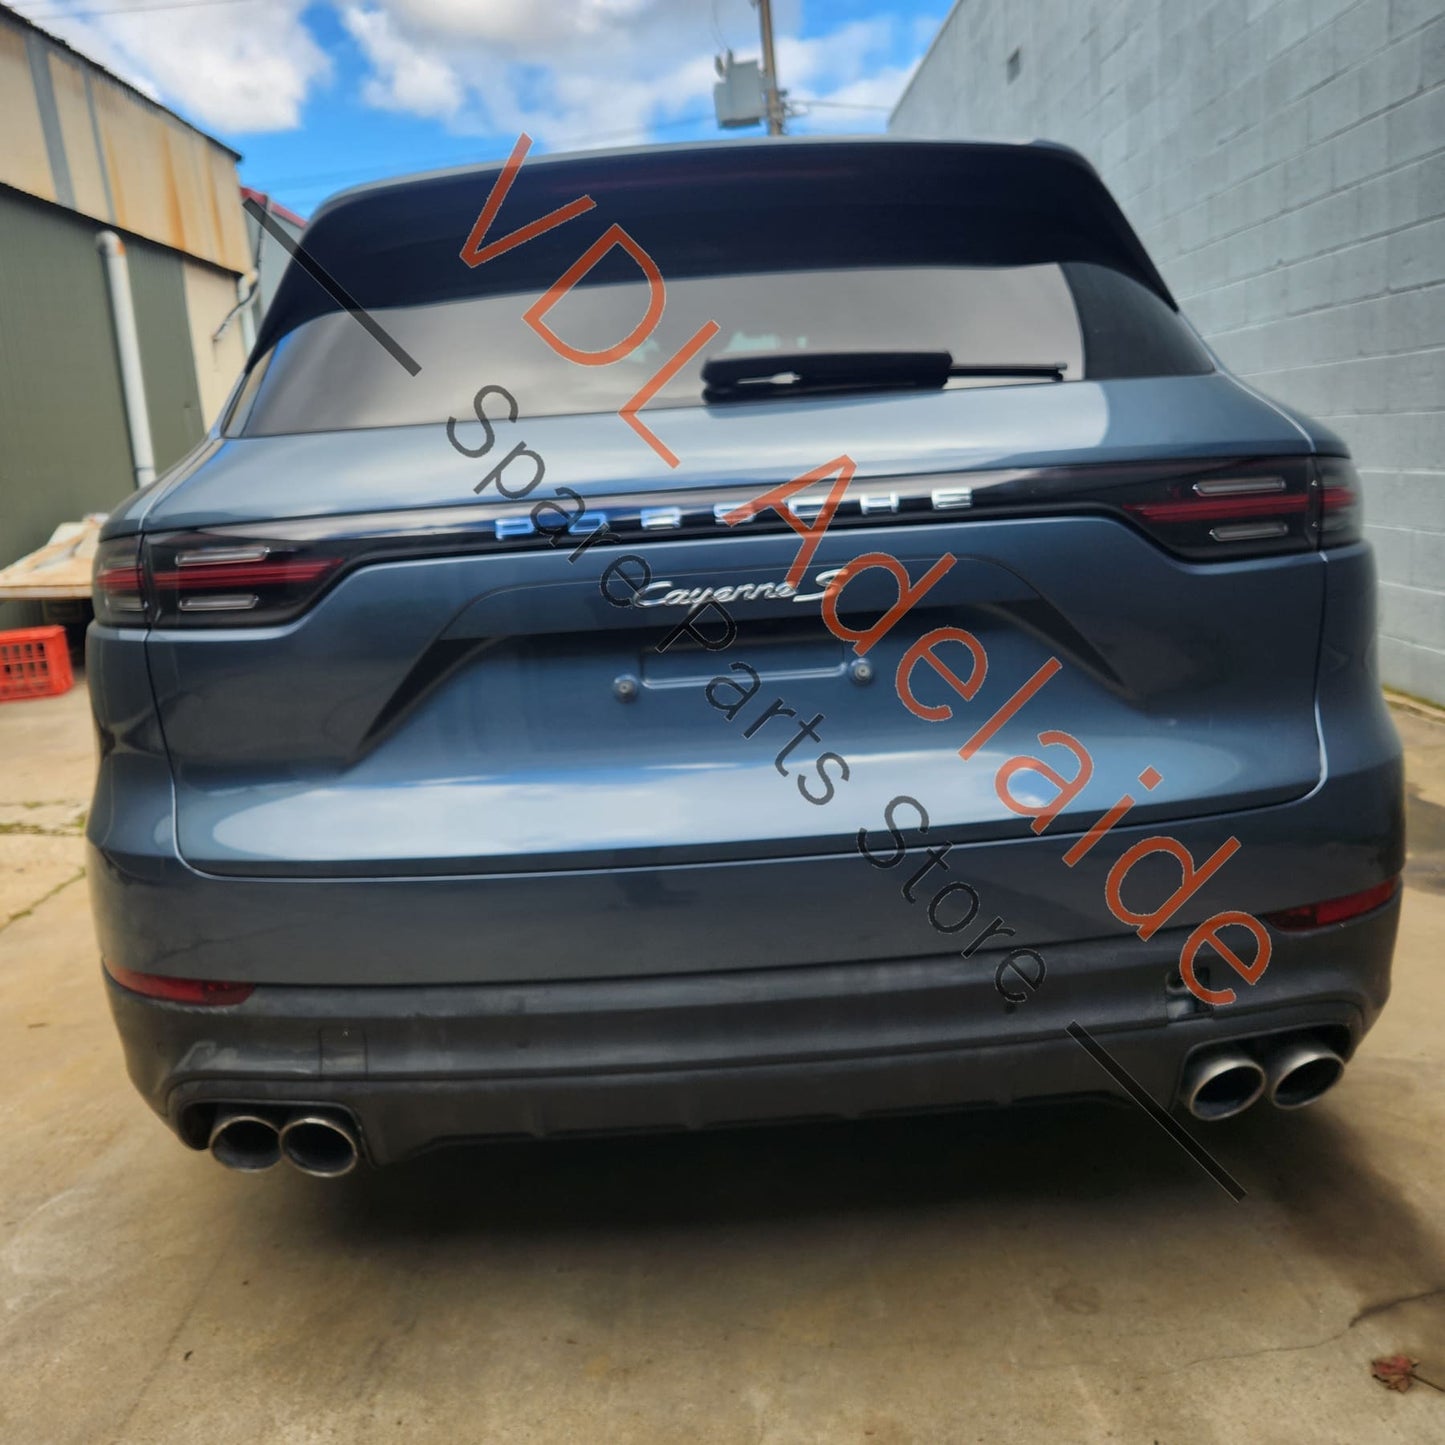 9Y0827129A    Porsche Cayenne E3 Exterior Trim for Rear Boot Tailgate with Badge & Licence Plate Light Biscay Blue